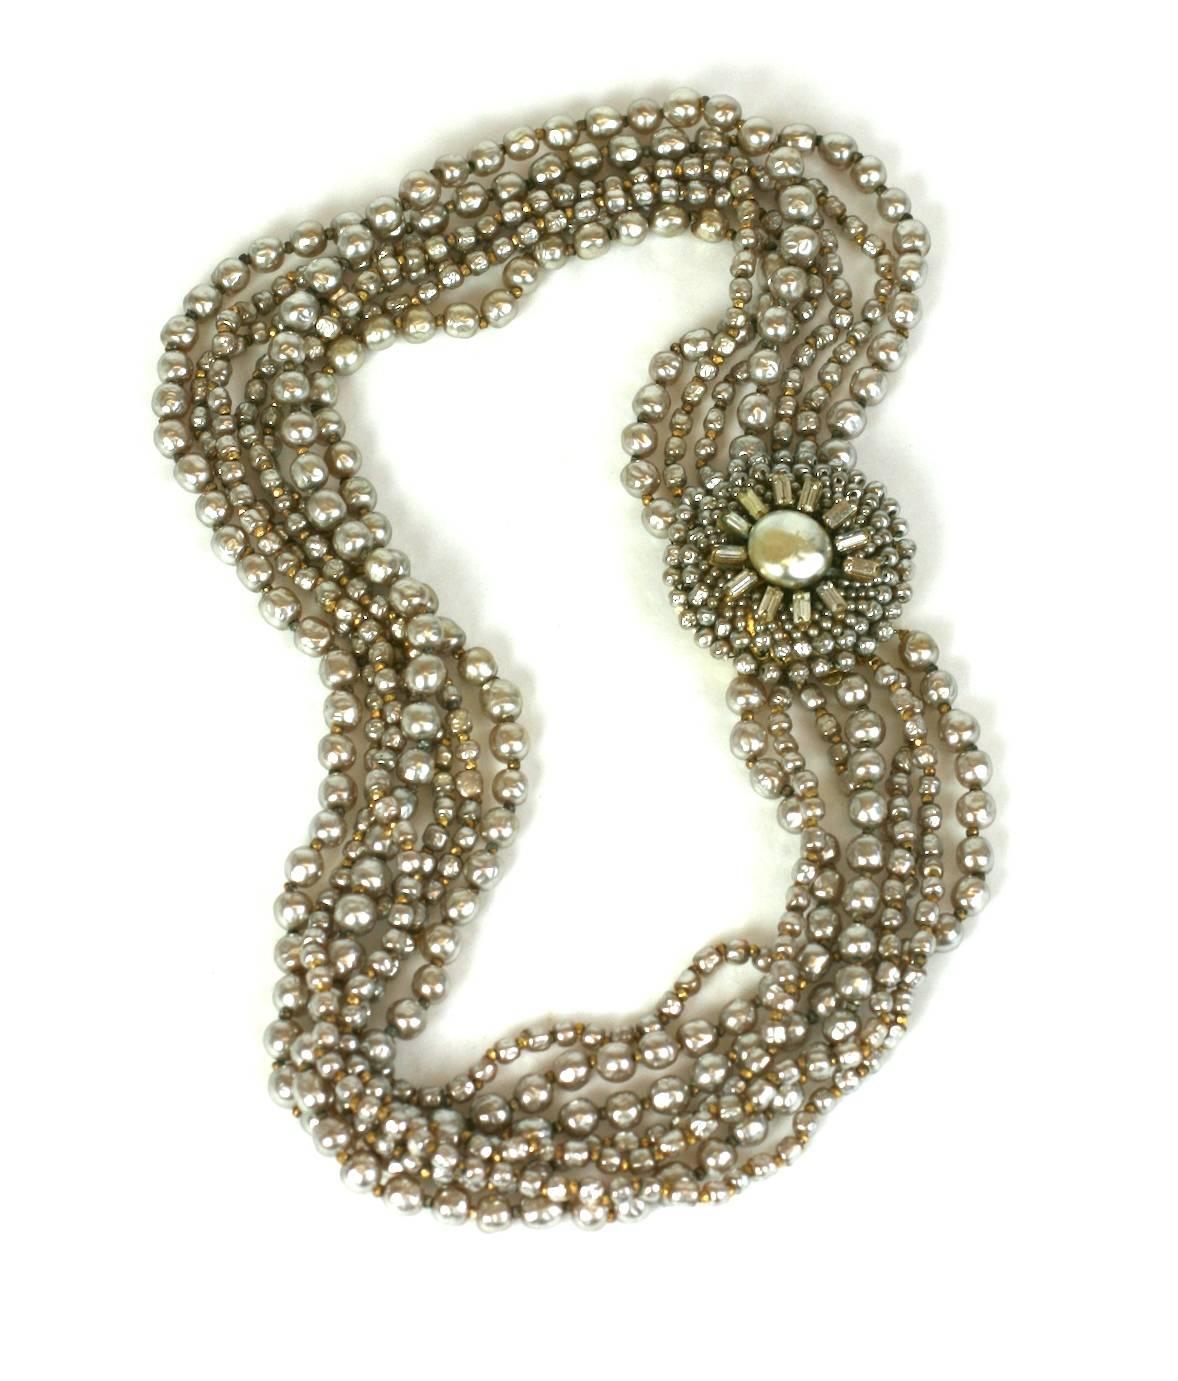 Stunning and collectible Miriam Haskell Faux Pearl Necklace of multiple strands of creamy signature faux pearls with elaborately embroidered pave baguette and faux seed pearl clasp. Miriam Haskell's vintage pearls have a wonderful creamy patina.